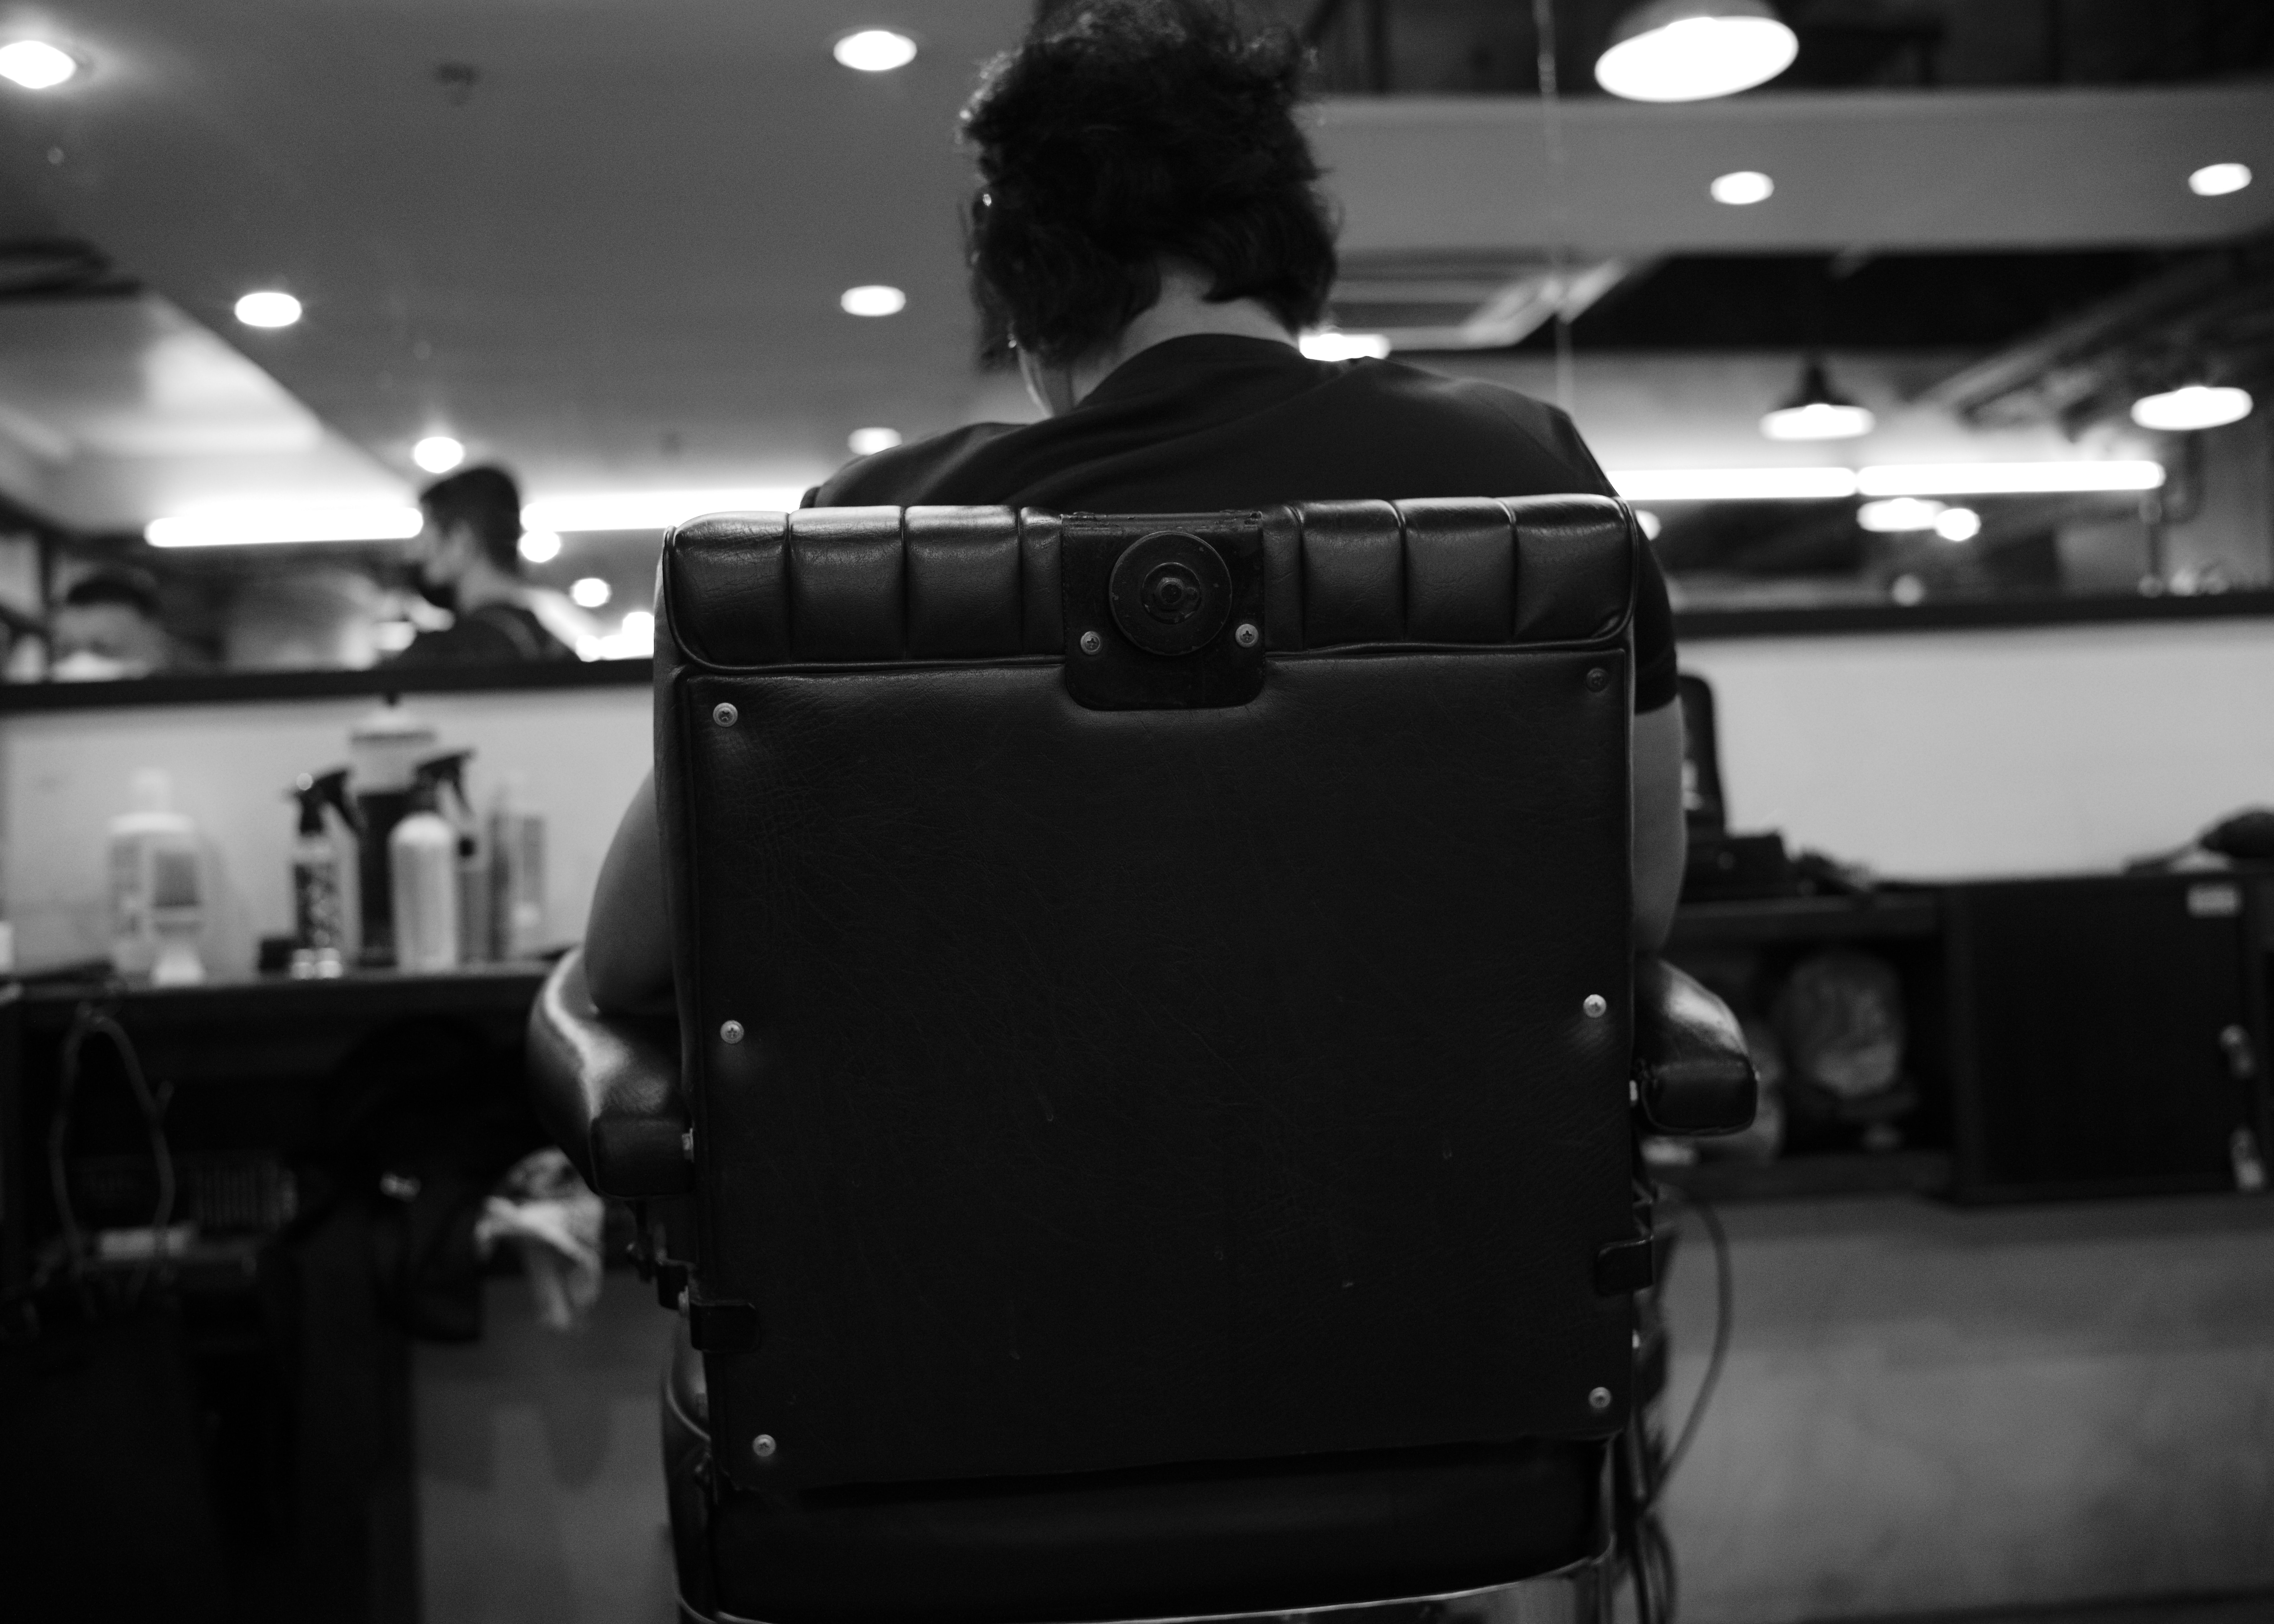 Person sitting on a barbershop chair